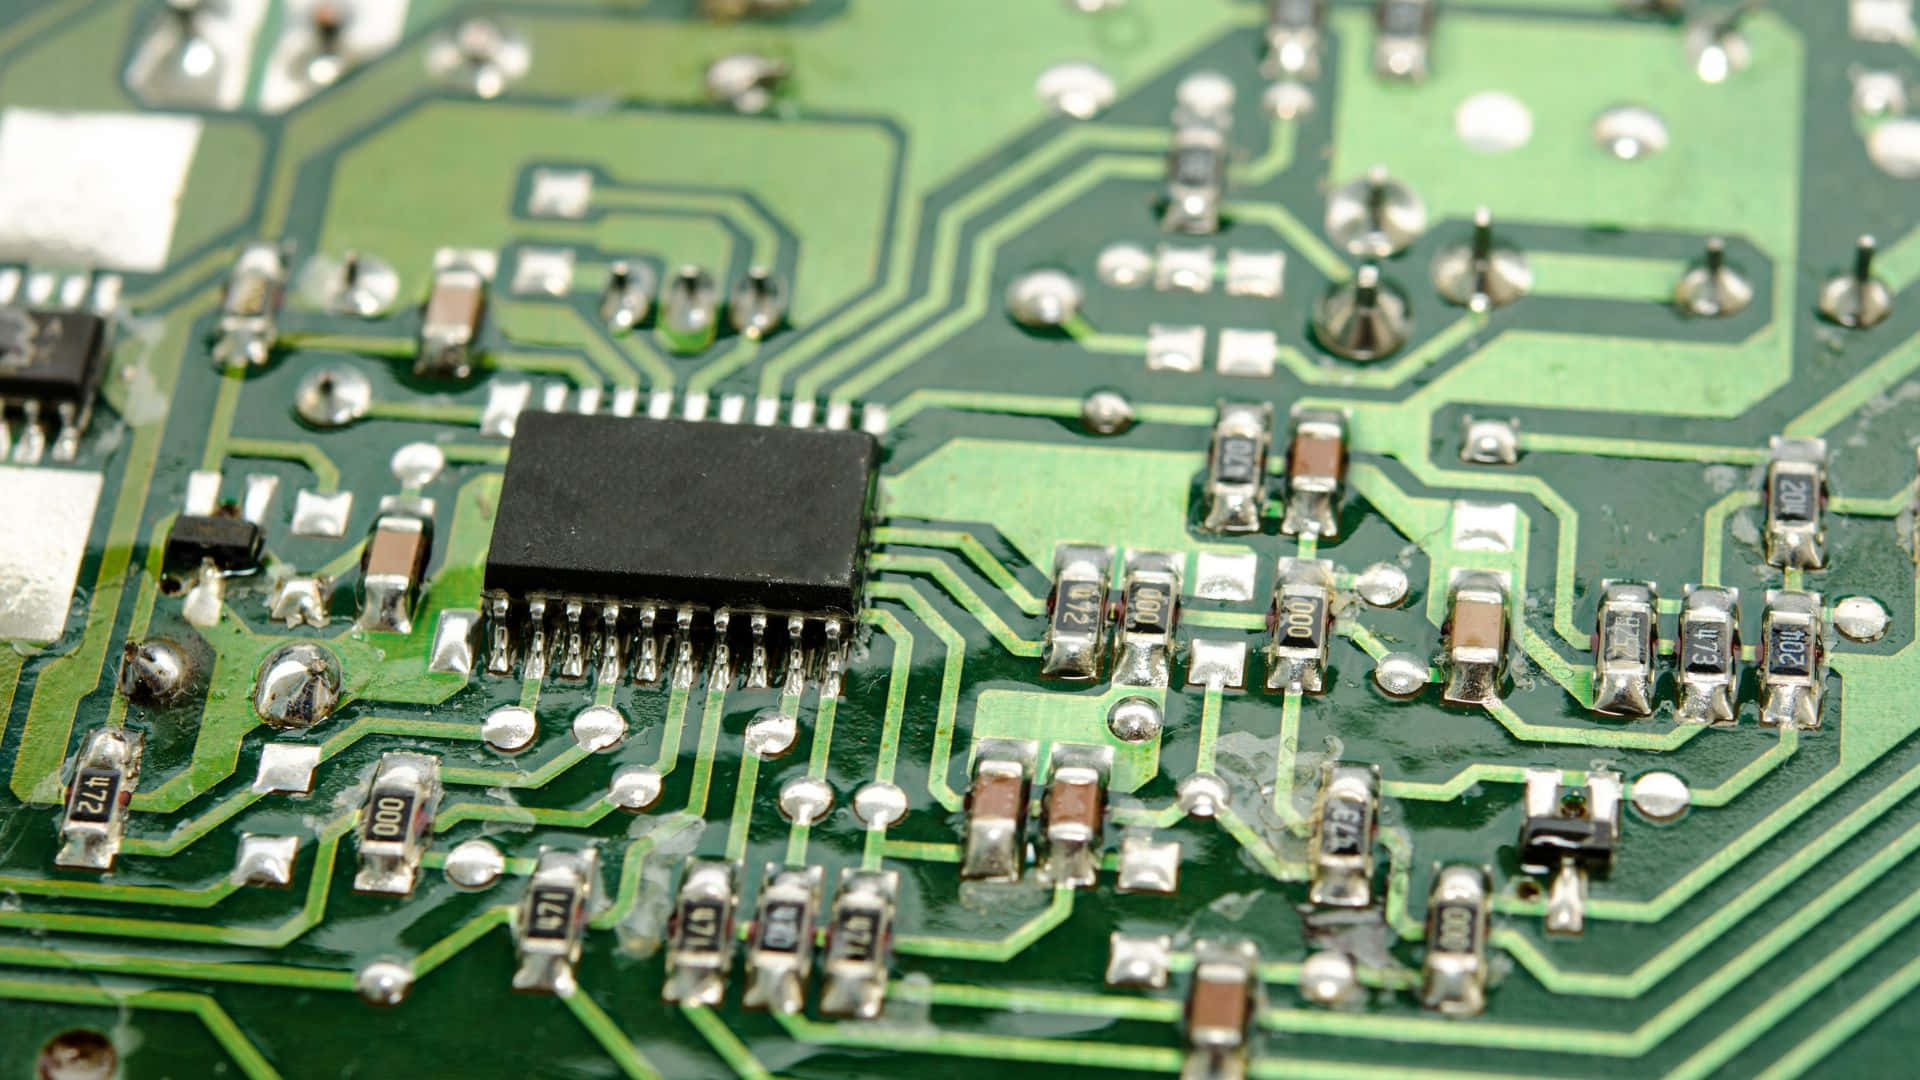 Electronic Components Interconnected on a Printed Circuit Board